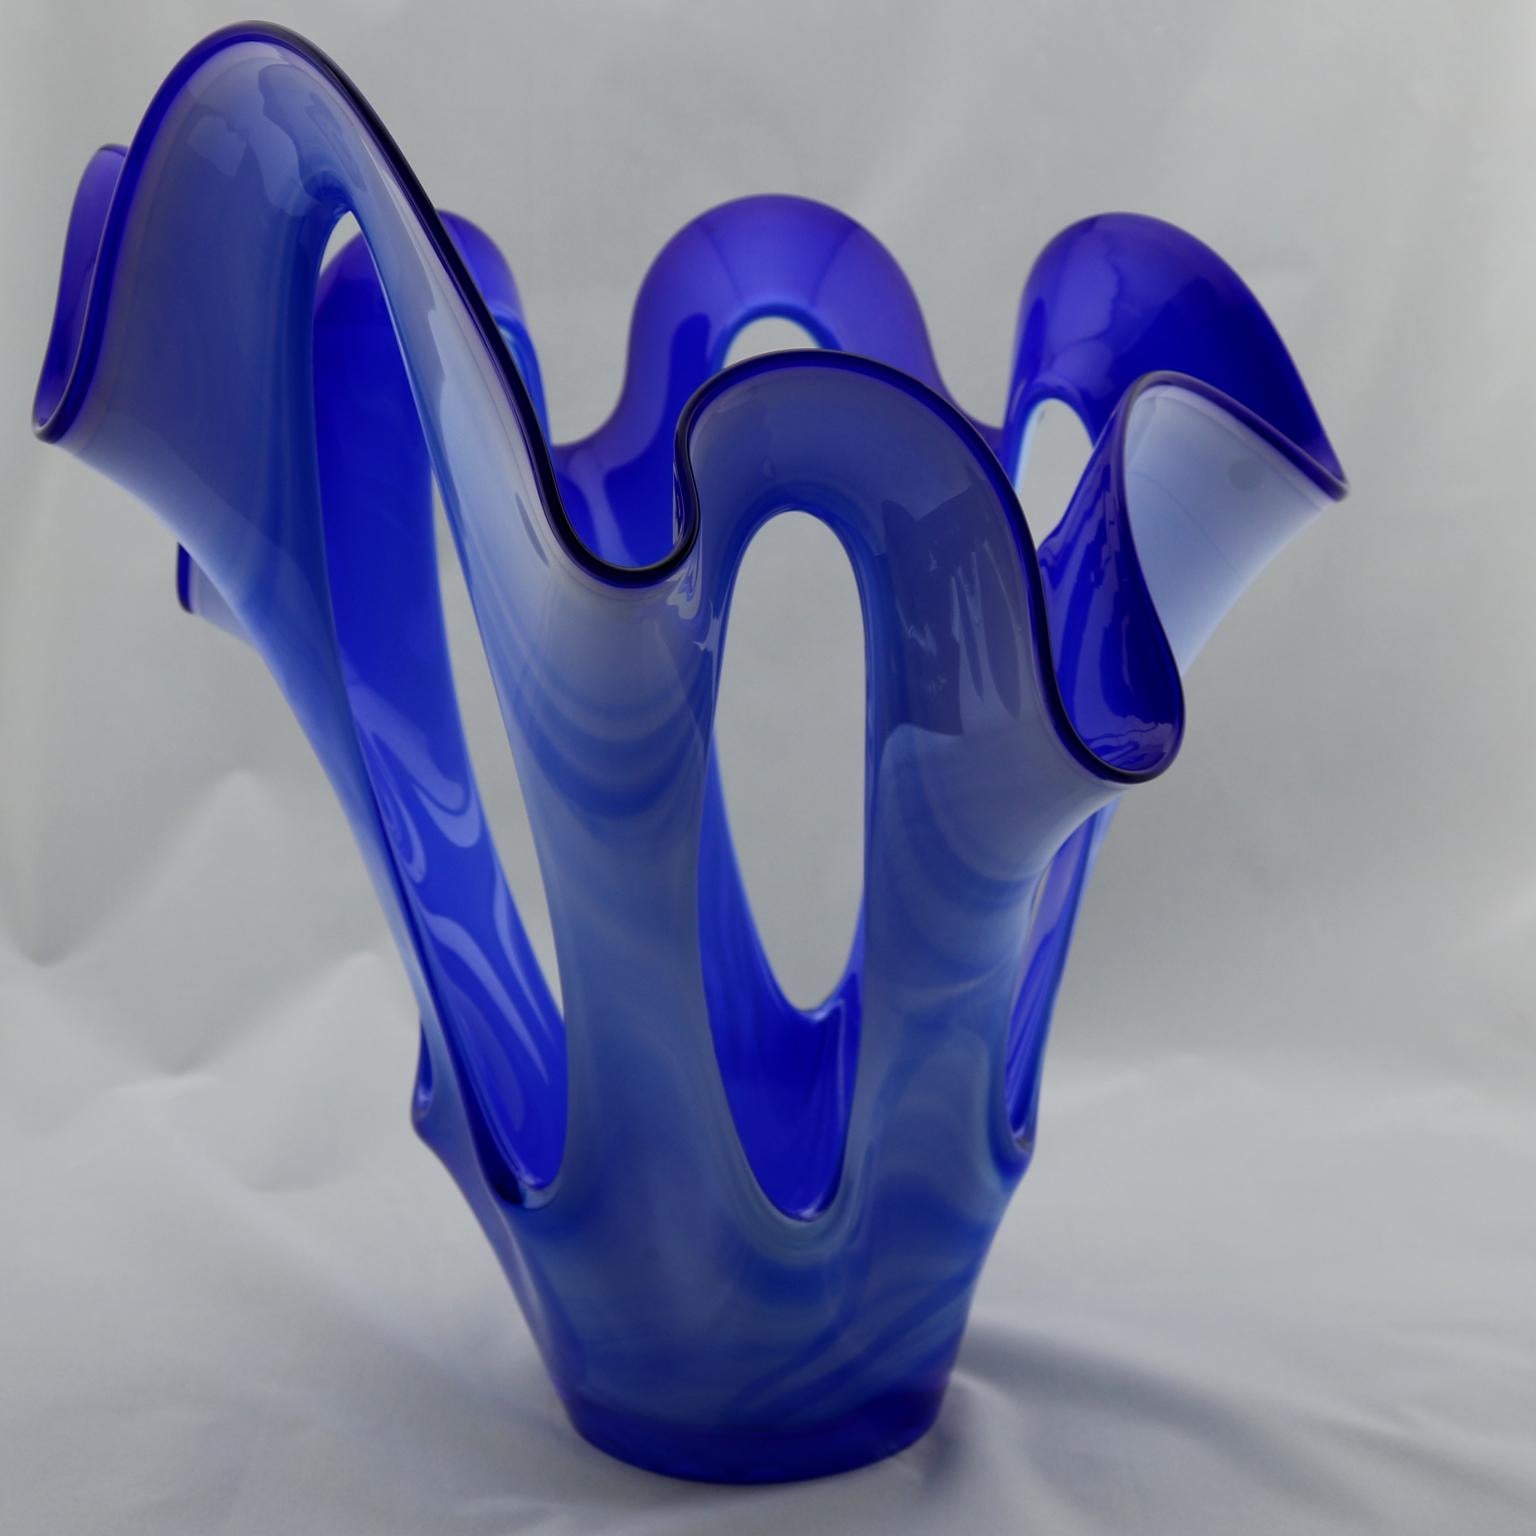 A highly decorative large handblown glass vase in blue and white glass color.